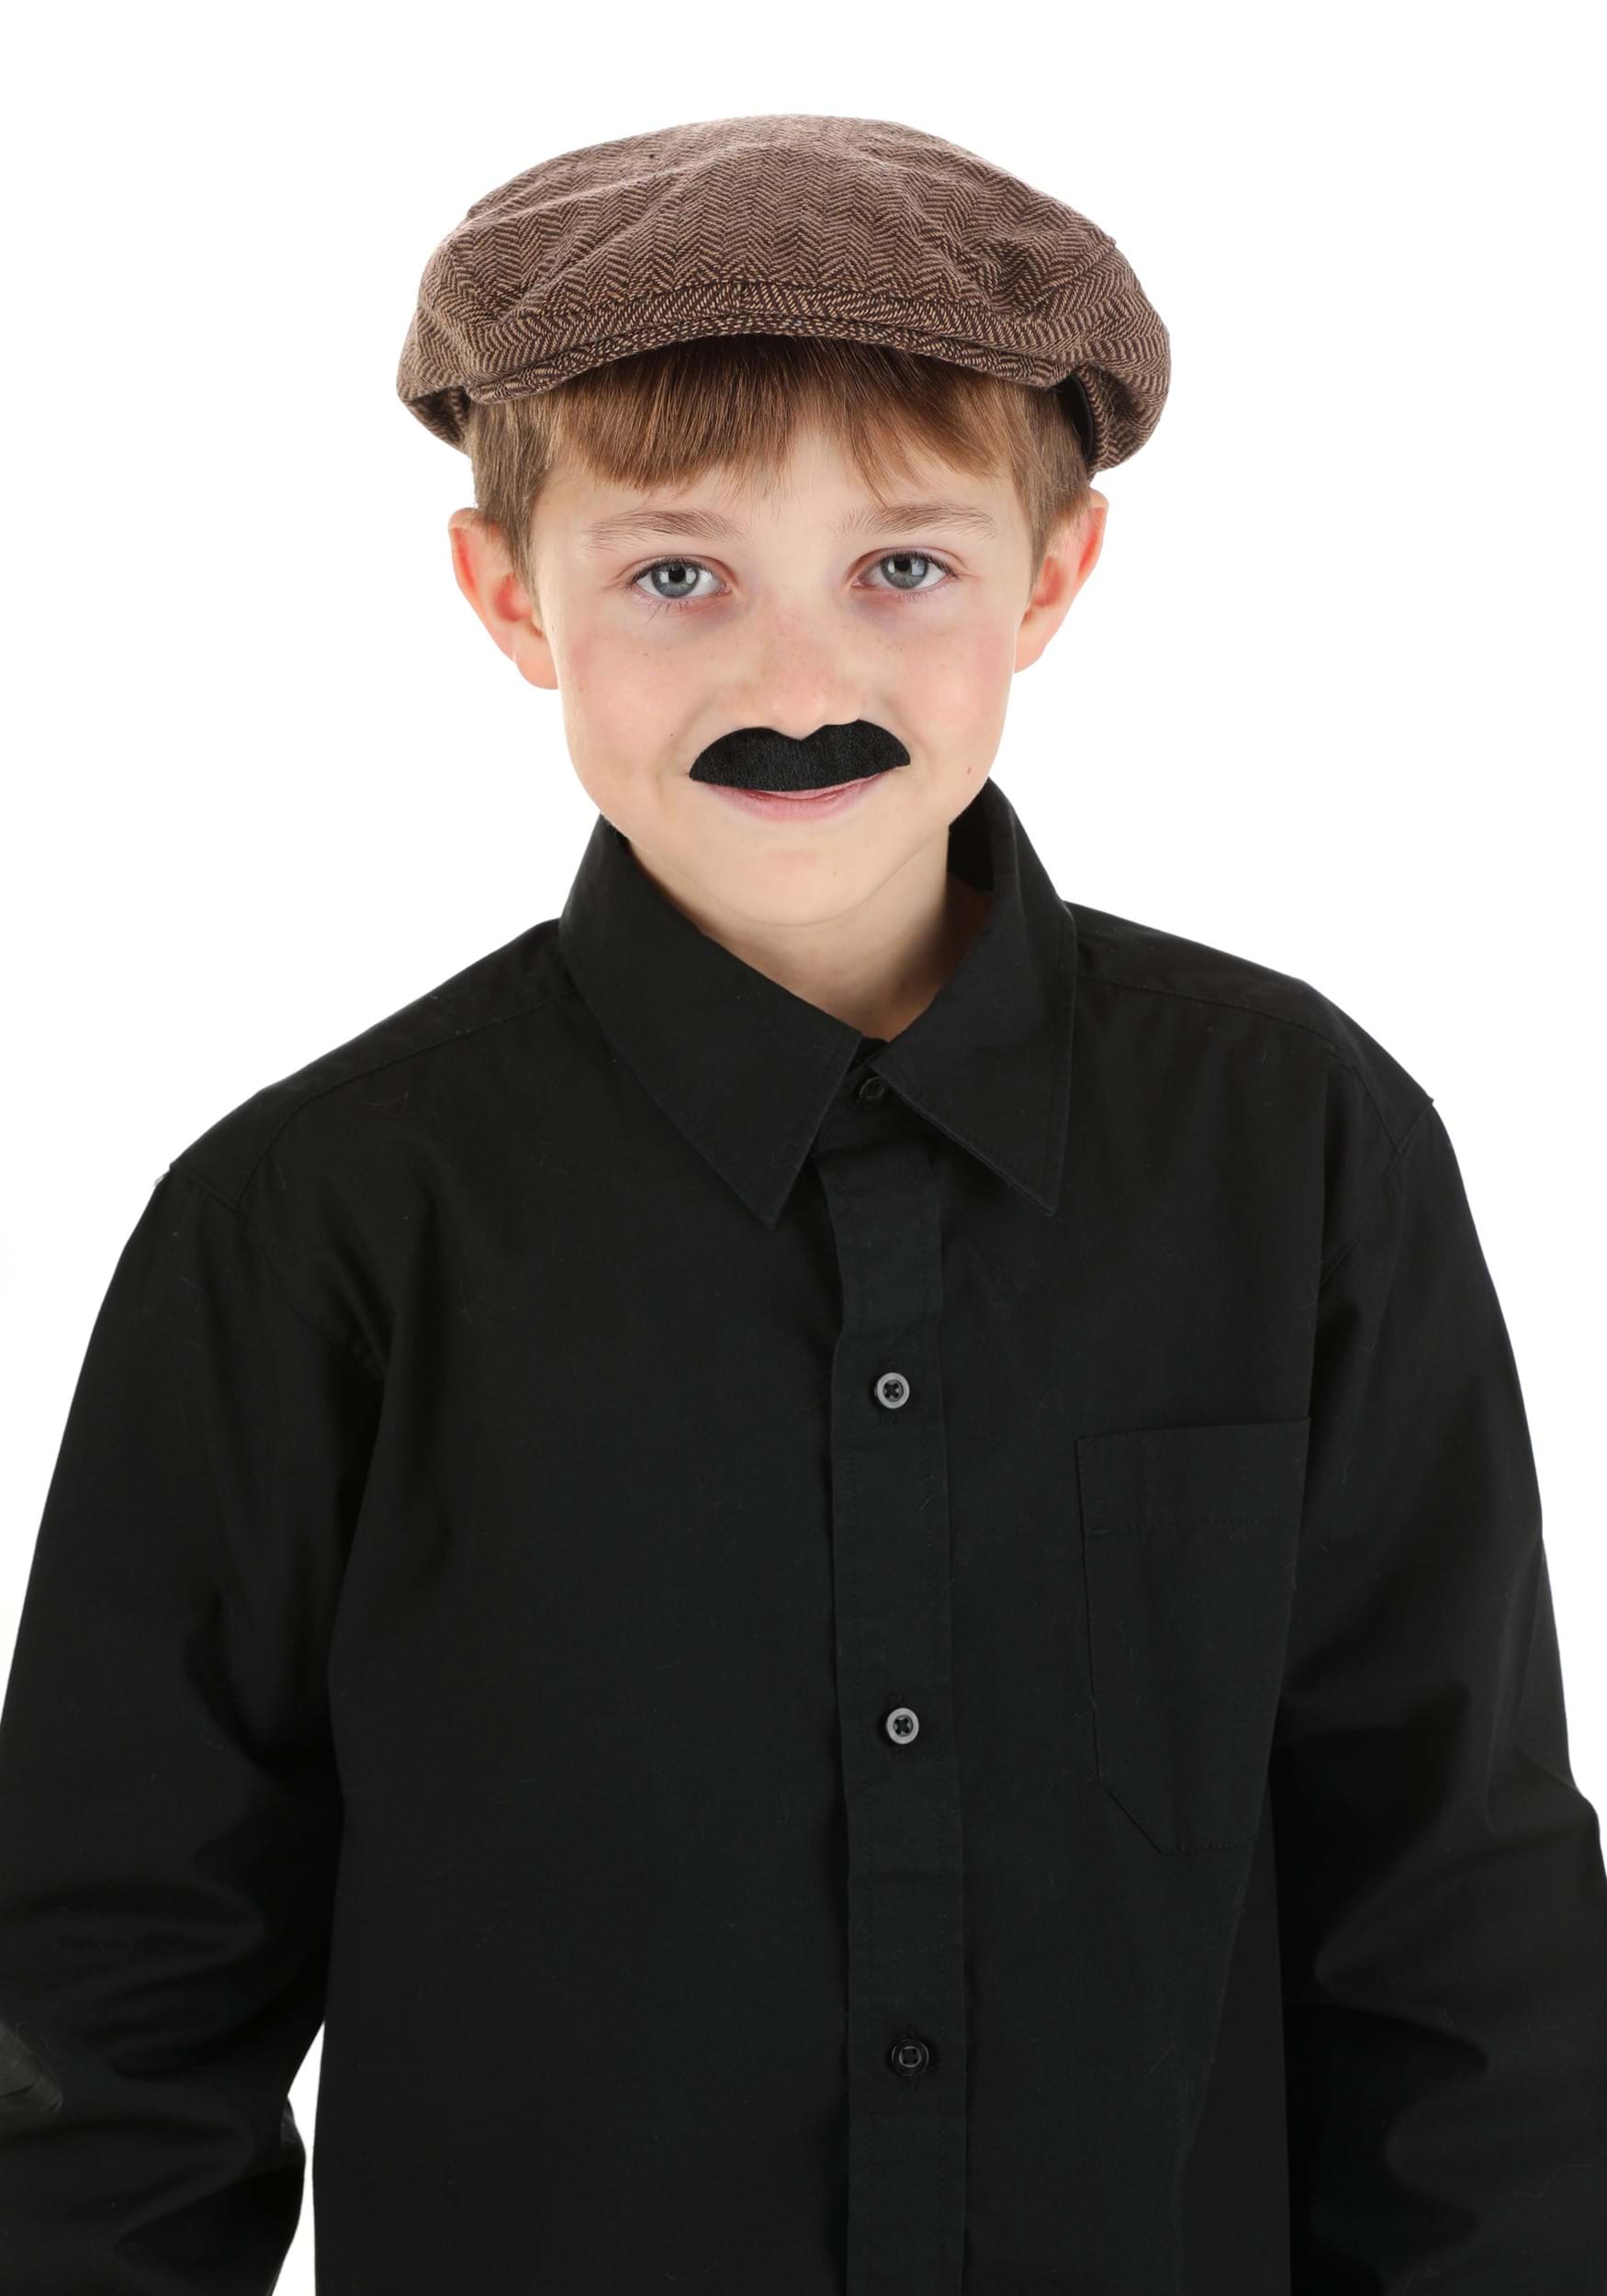 Buy BookMyCostume Subhash Chandra Bose Freedom Fighter Kids Fancy Dress  Costume - Green 7-8 years Online at Low Prices in India - Amazon.in